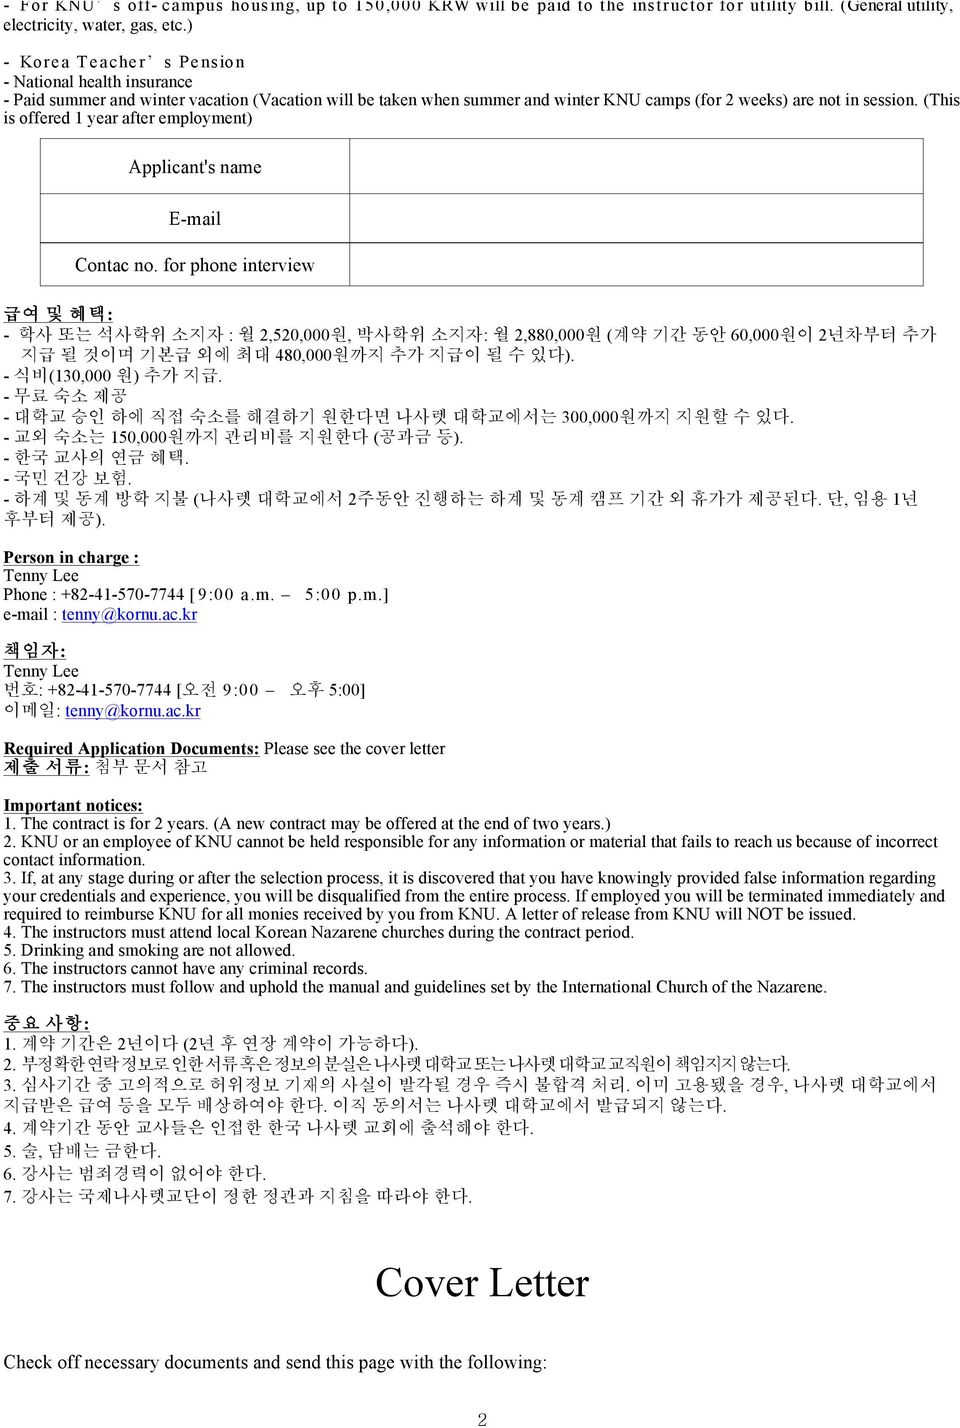 ) - Korea Teacher s Pension - National health insurance - Paid summer and winter vacation (Vacation will be taken when summer and winter KNU camps (for 2 weeks) are not in session.